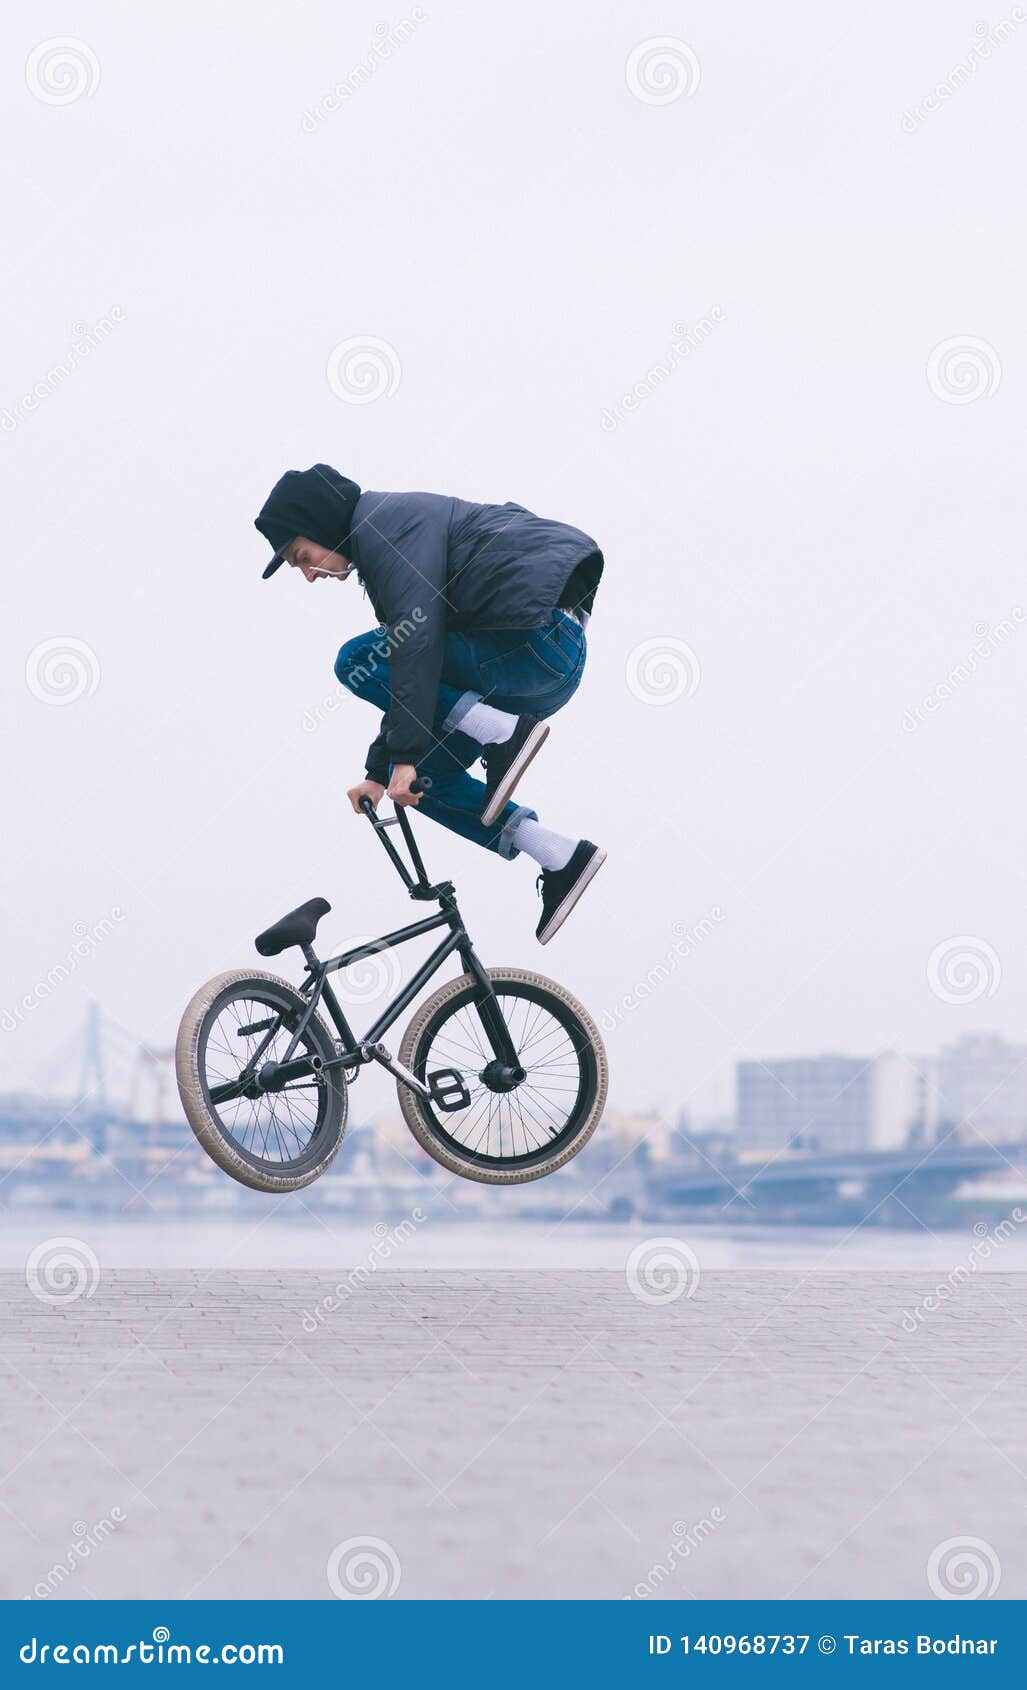 Young Man Makes an Air Tricks on a BMX Bike. Against the Background of the  Urban Landscape Stock Image - Image of jump, bicycle: 140968737